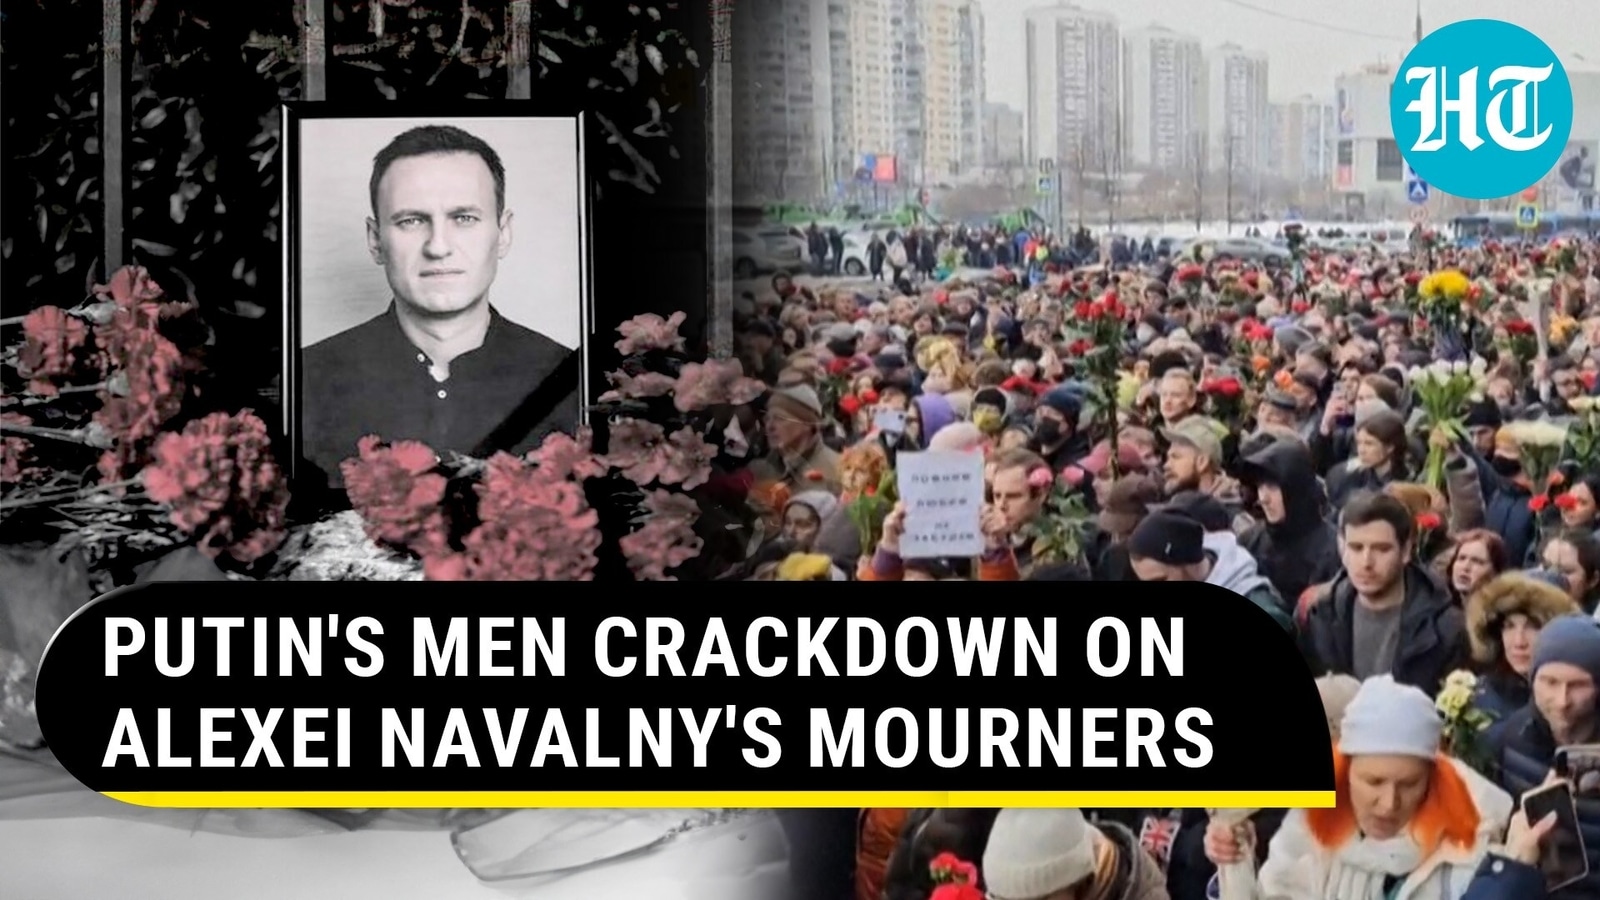 Putin's Bid To Silence Navalny's Mourners; Over 100 Detained As Anti-Russia Slogans Rock Nation